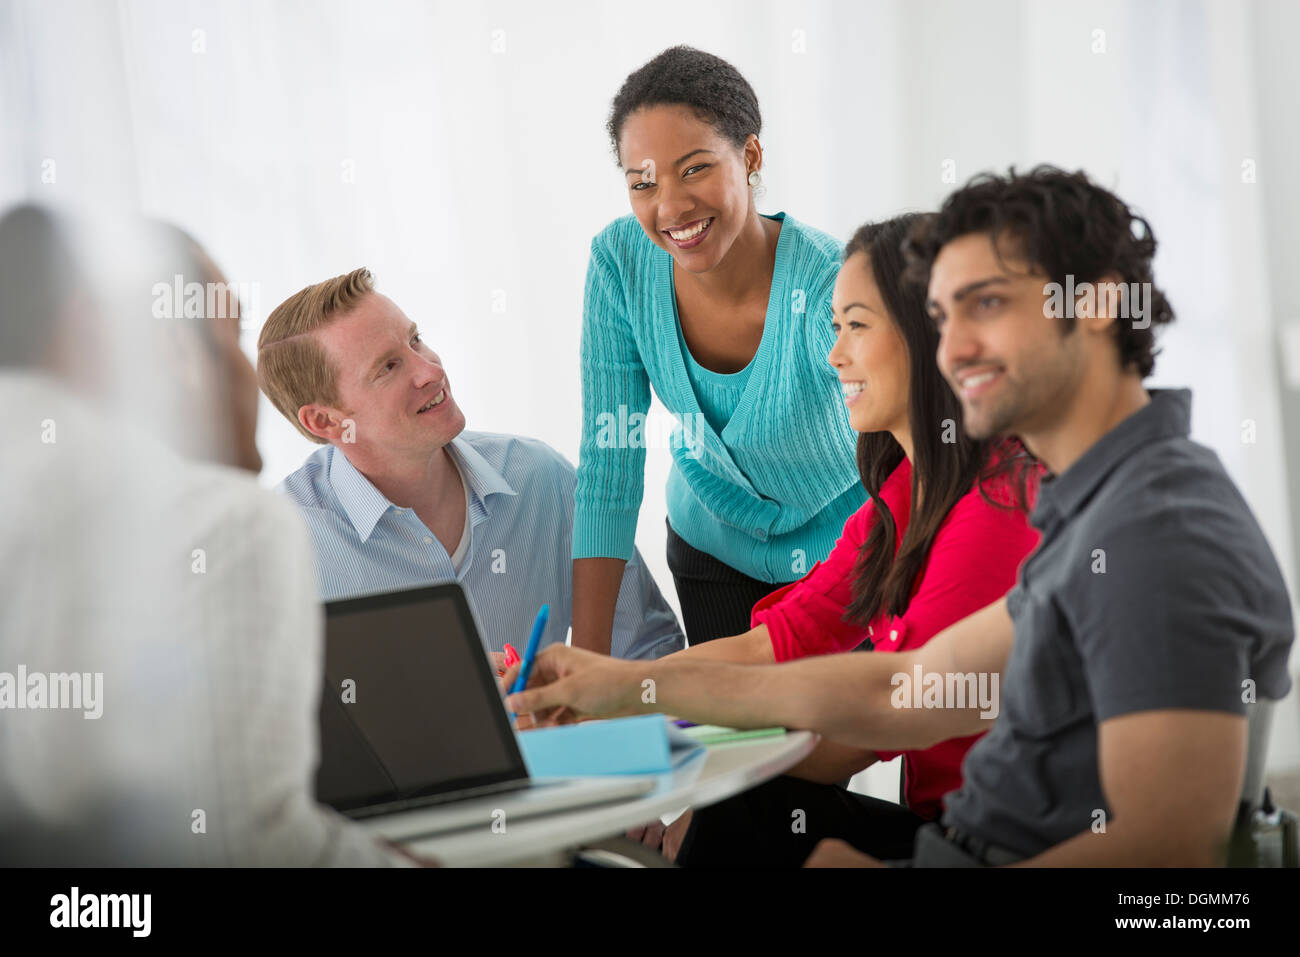 A multi ethnic group of people around a table, men and women. Teamwork. Meeting. Stock Photo